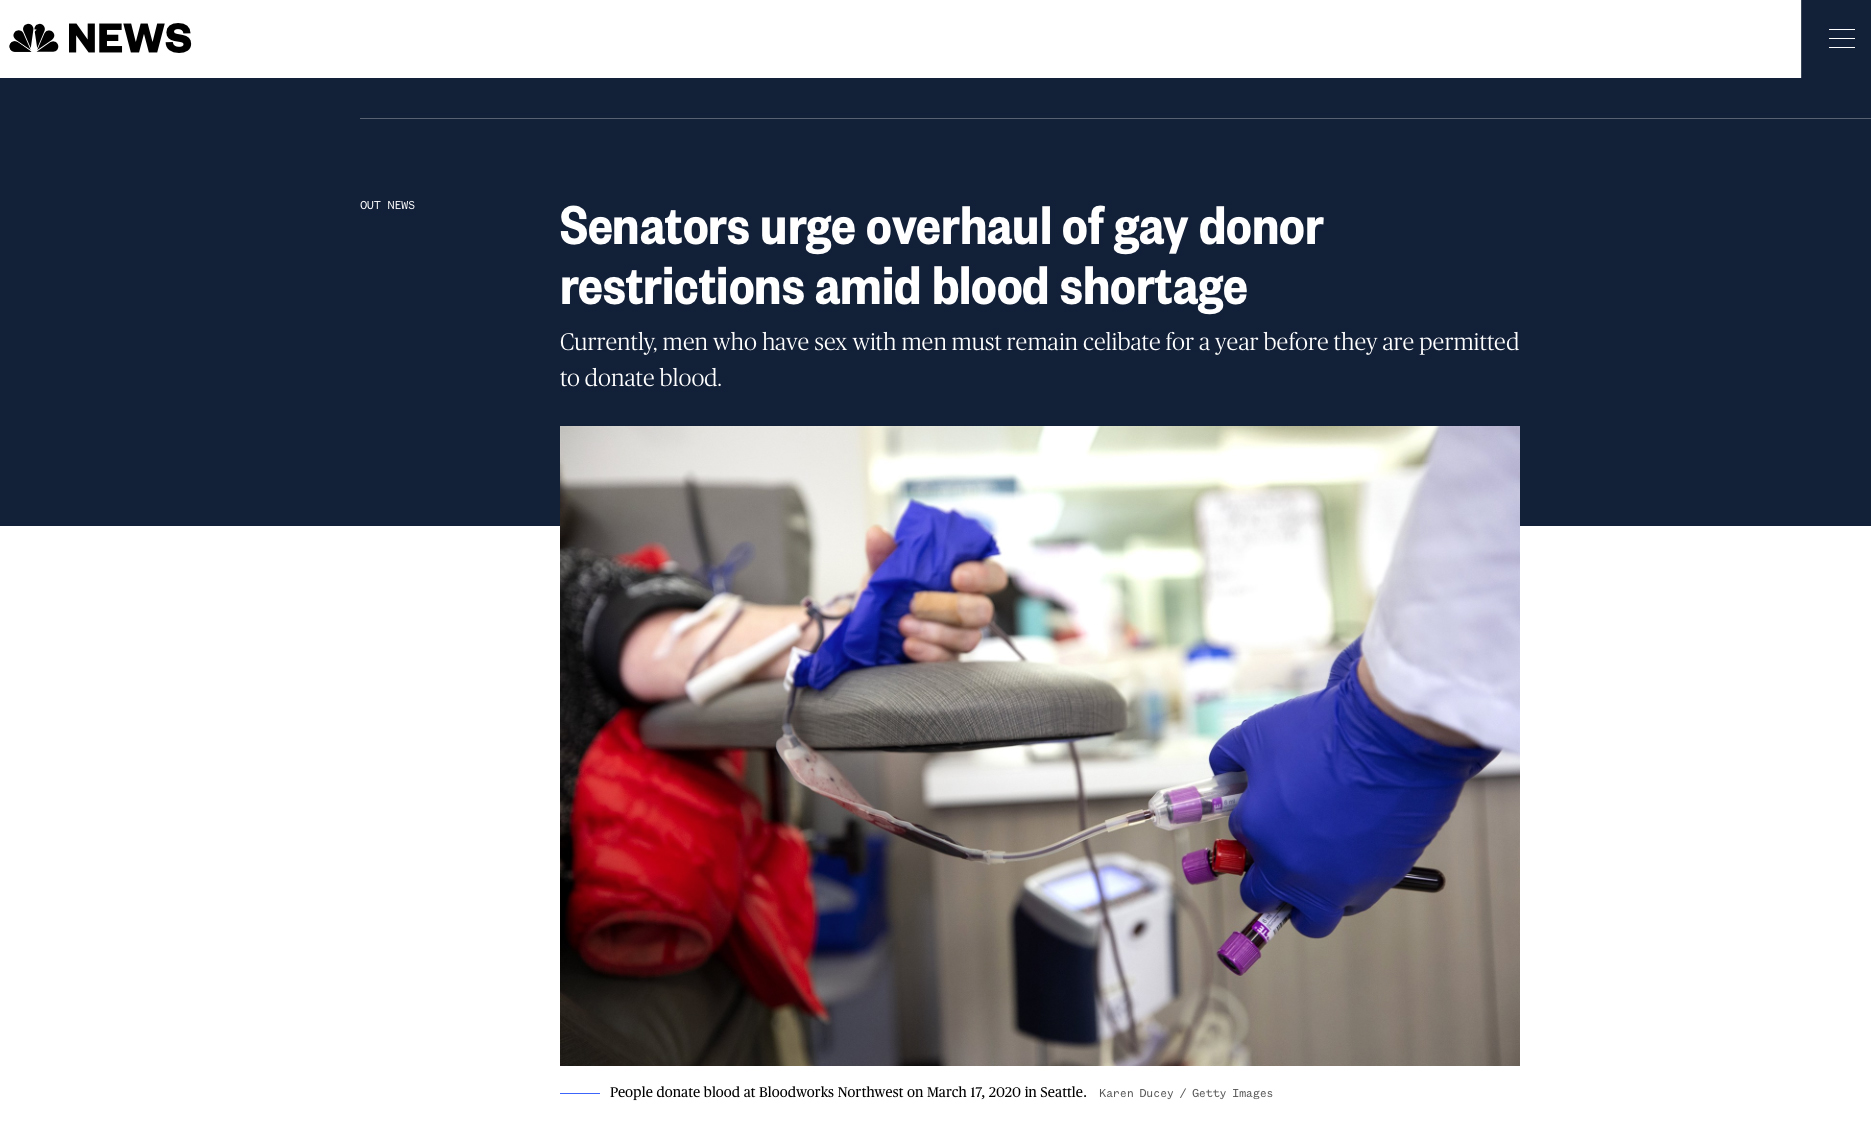 {quote}Senators urge overhaul of gay donor restrictions amid blood shortage{quote} Photo for Getty Images. Published on NBC News, March 17, 2020.